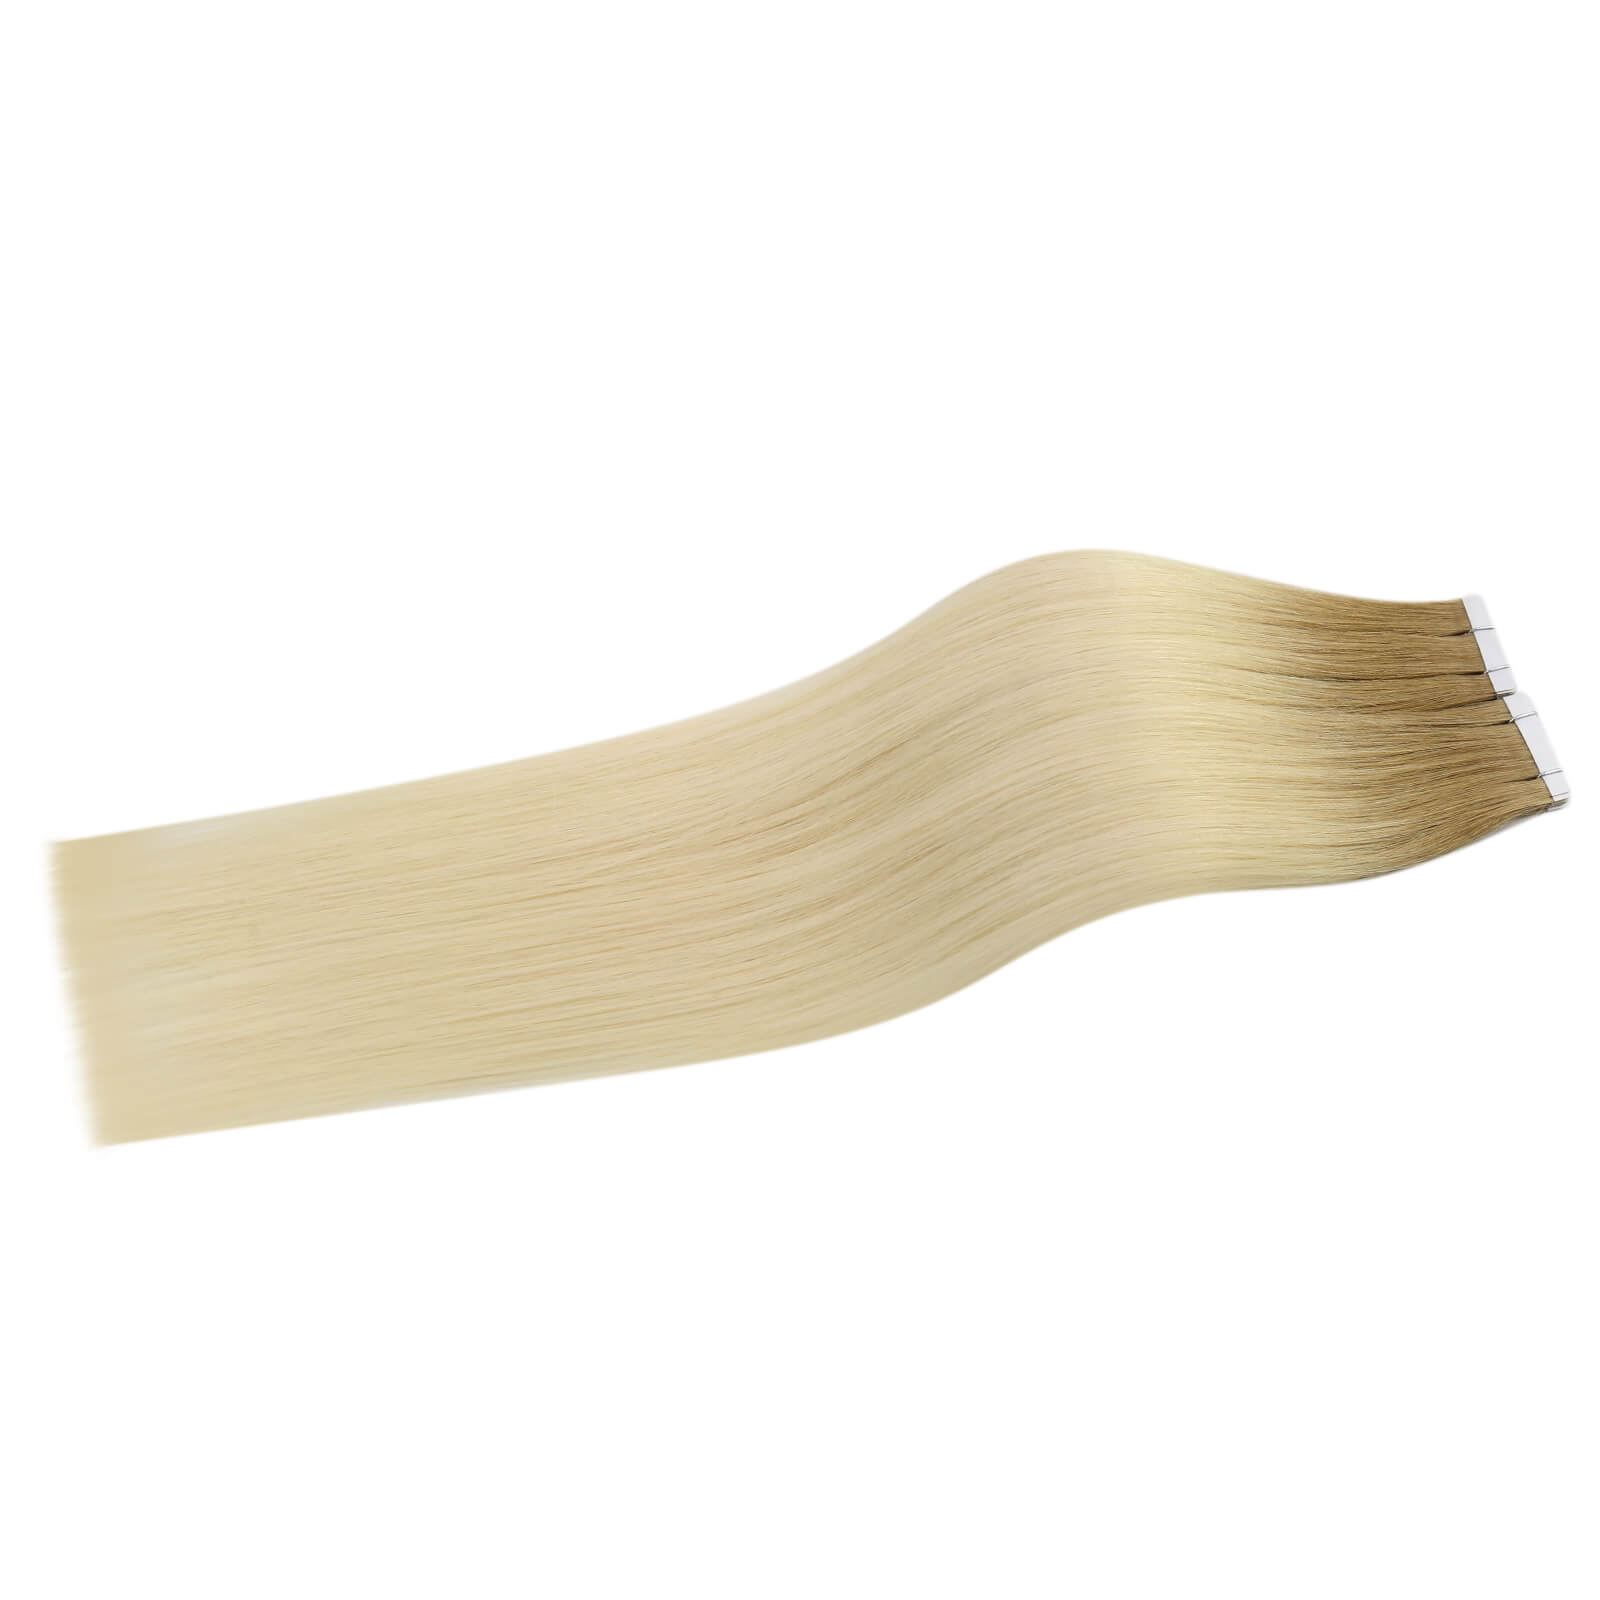 tape in hair extensions,best hair extensions,tape in hair extensions human hair,best hair extensions,20 inch hair exensions for thin hair